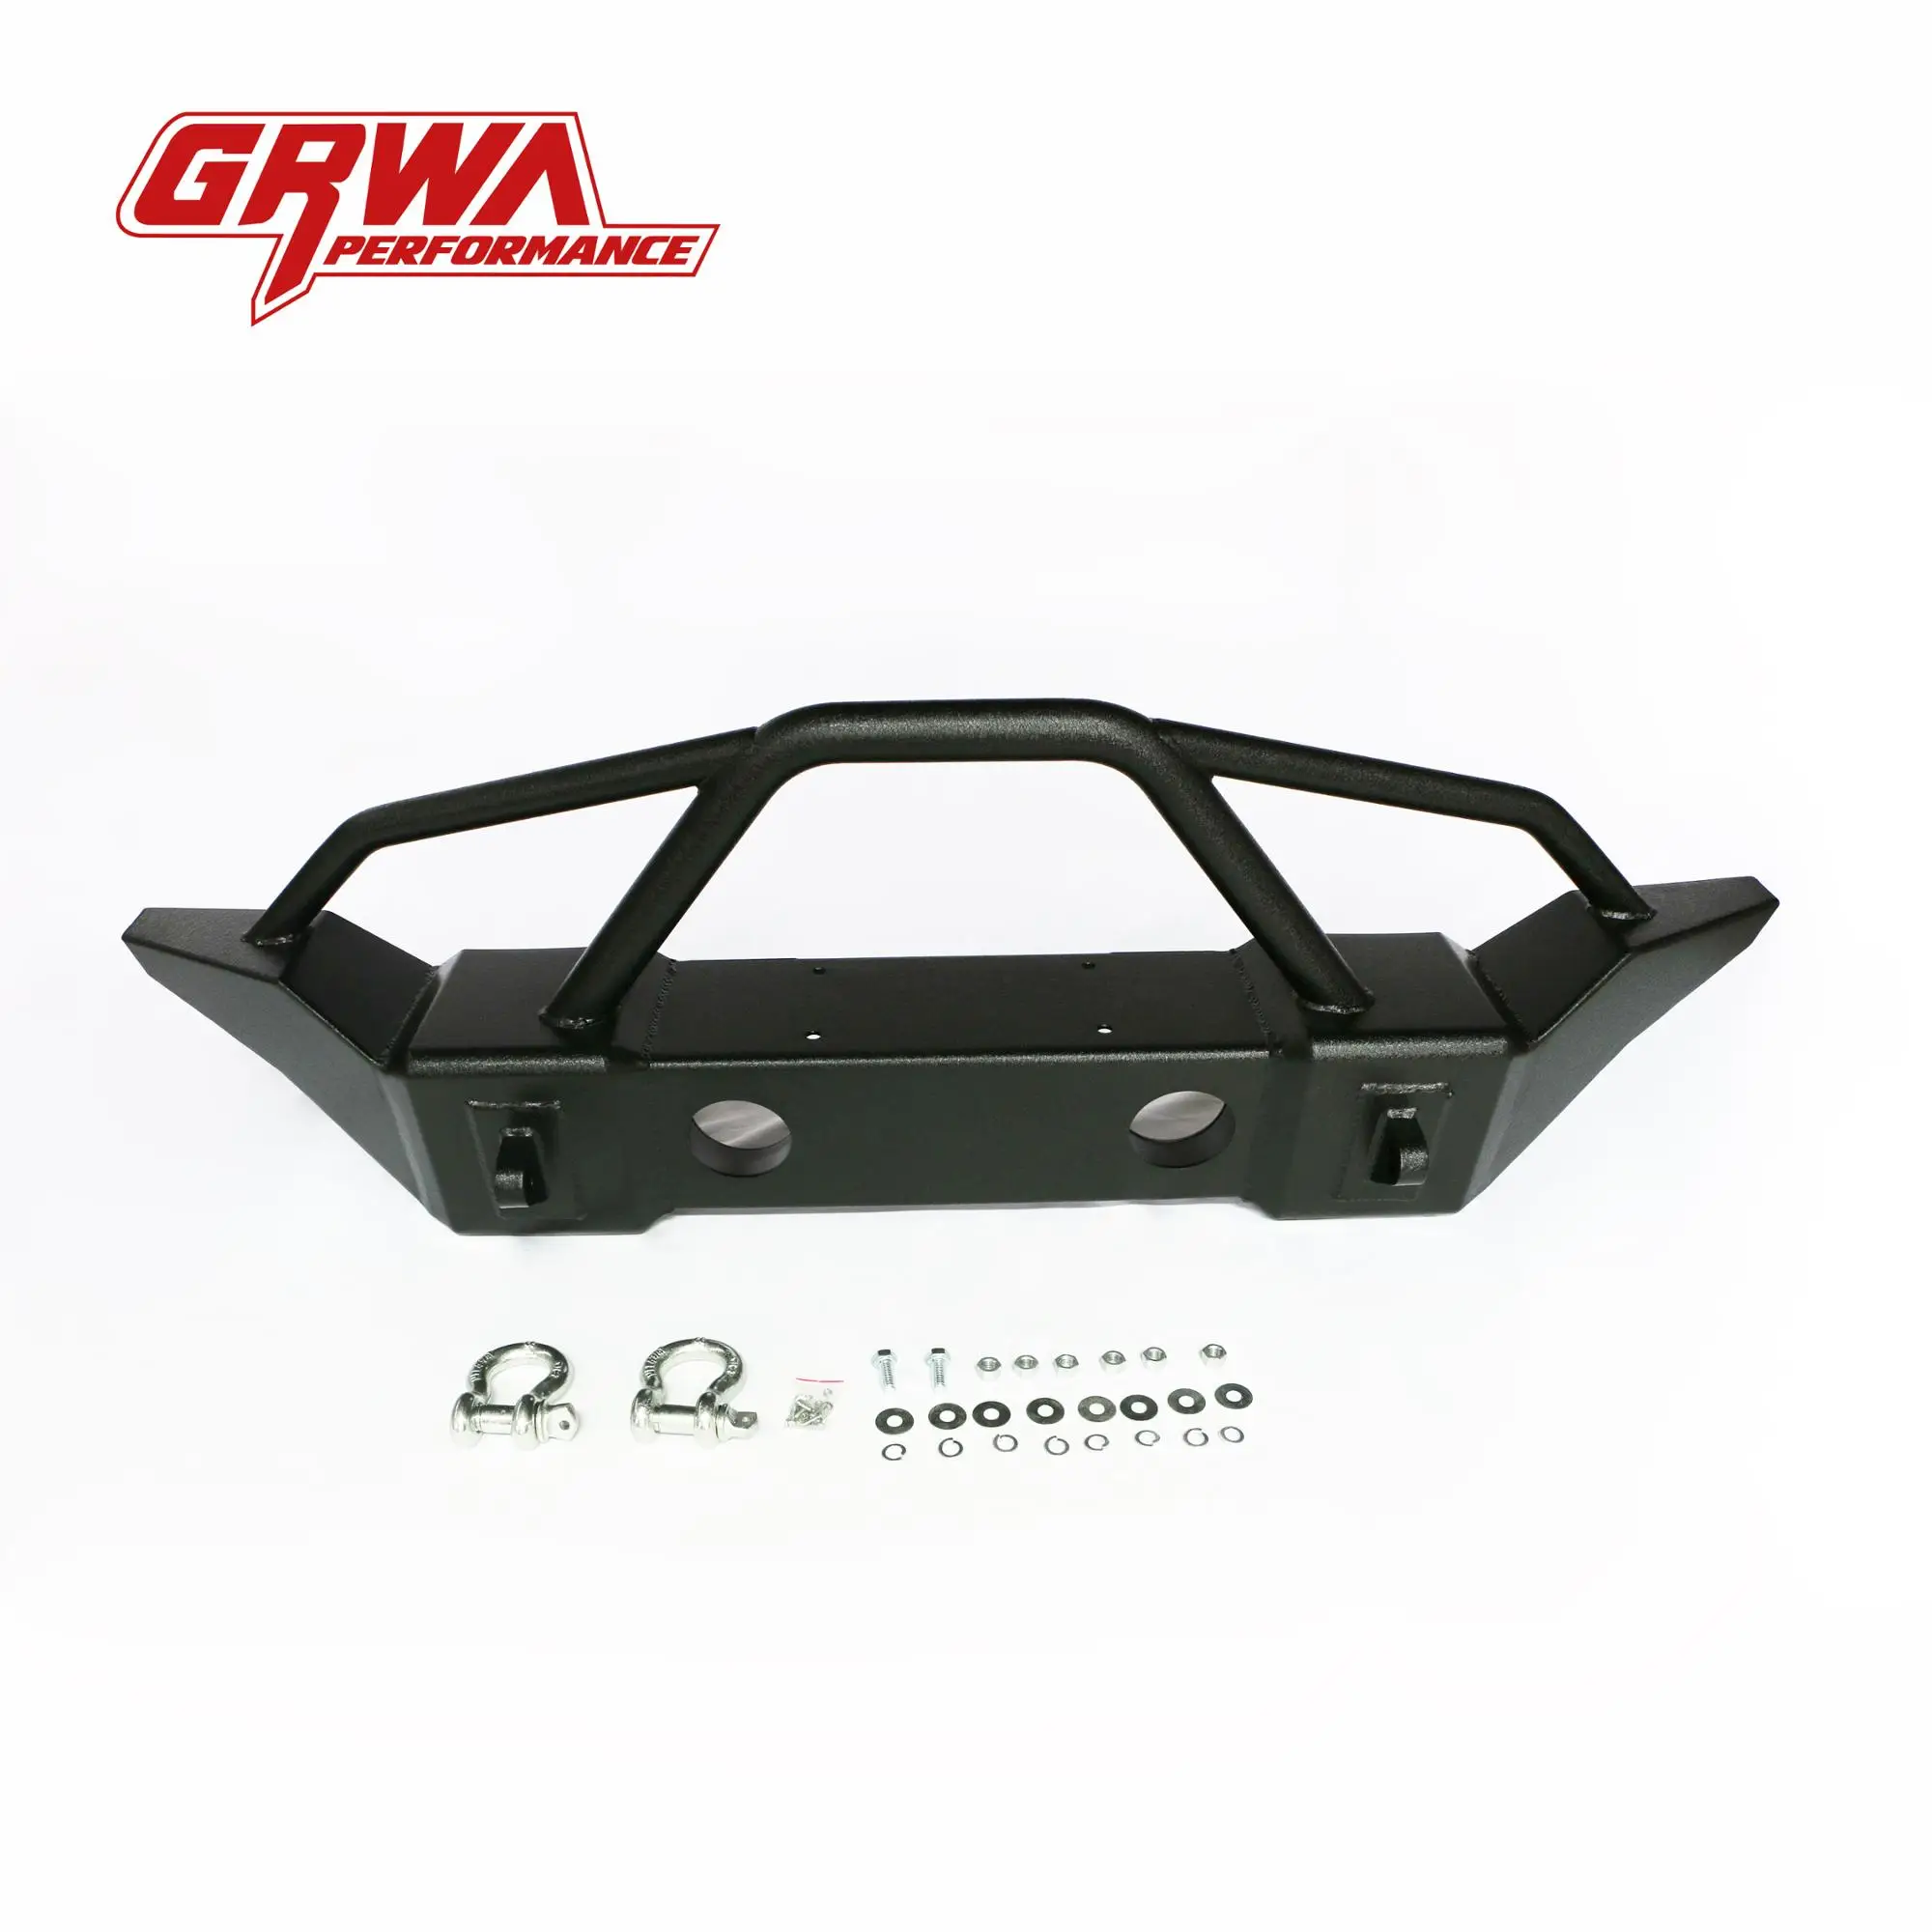 High Quality Bumper Front For Jeep Wrangler Jk 07 - Buy Bumper Front,Bumper  Front For Jeep Wrangler,Bumper Front Product on 